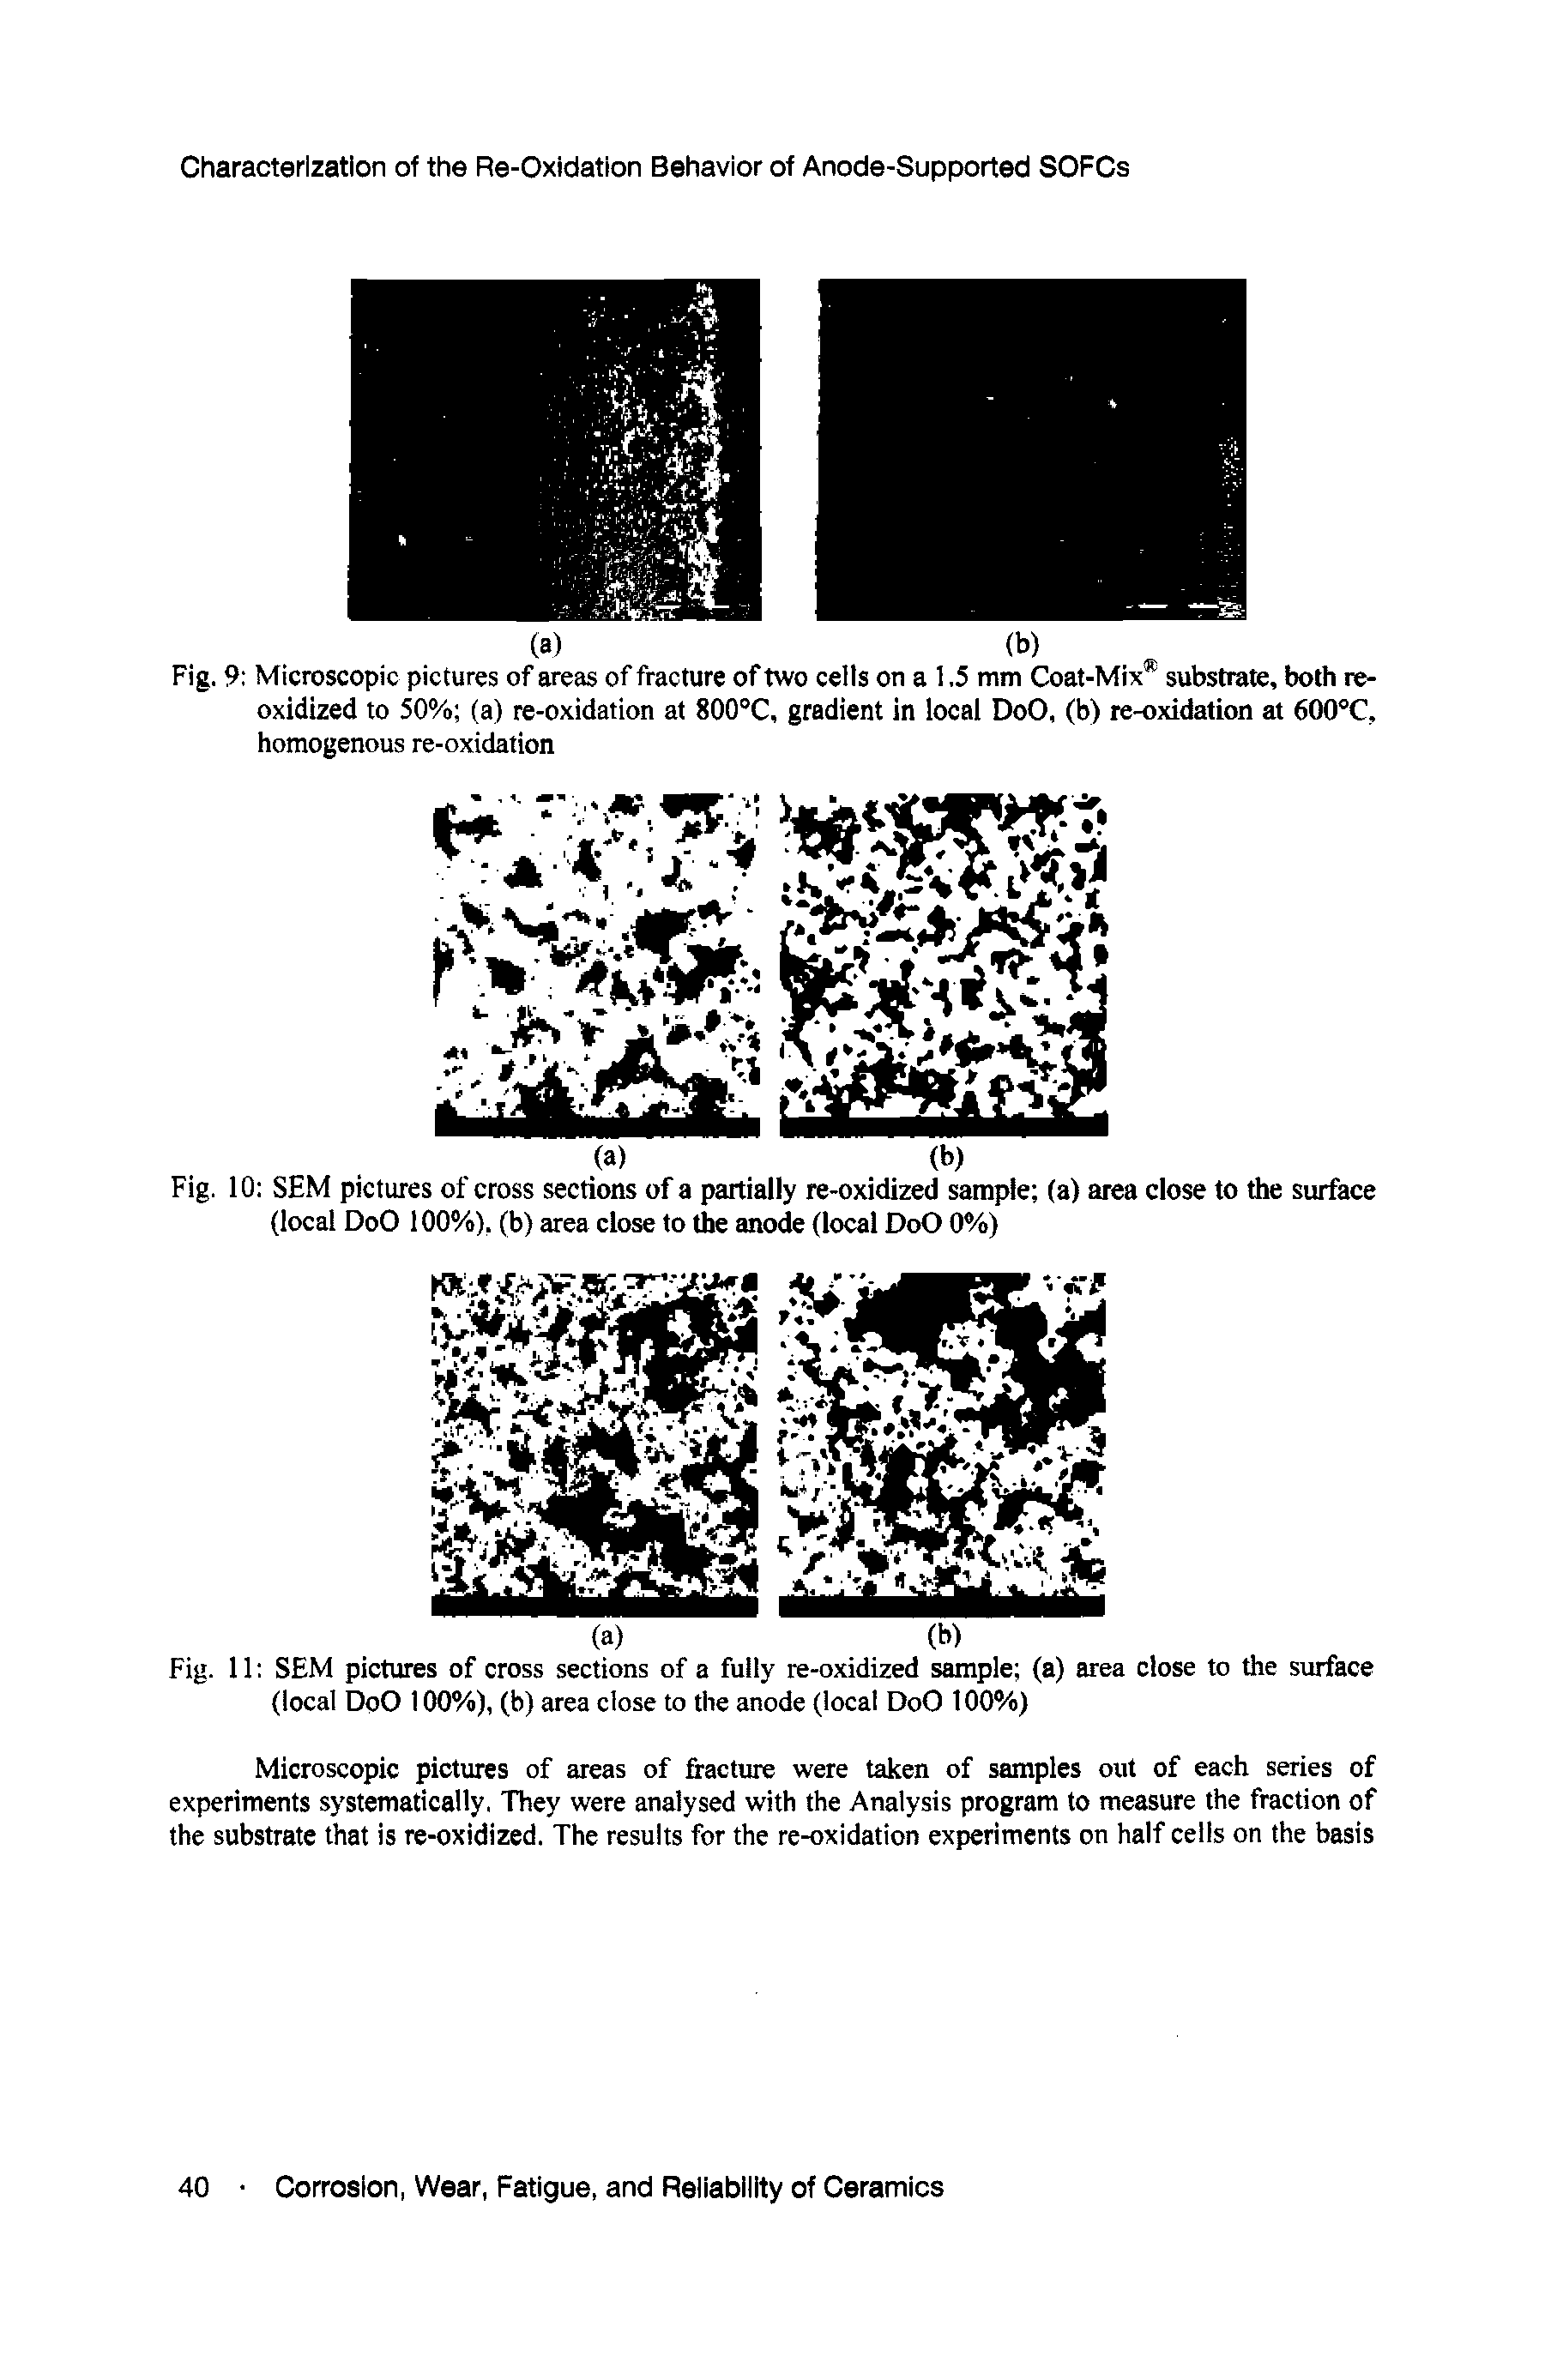 Fig. 10 SEM pictures of cross sections of a partially re-oxidized sample (a) area close to the surface (local DoO 100%), (b) area close to the anode (local DoO 0%)...